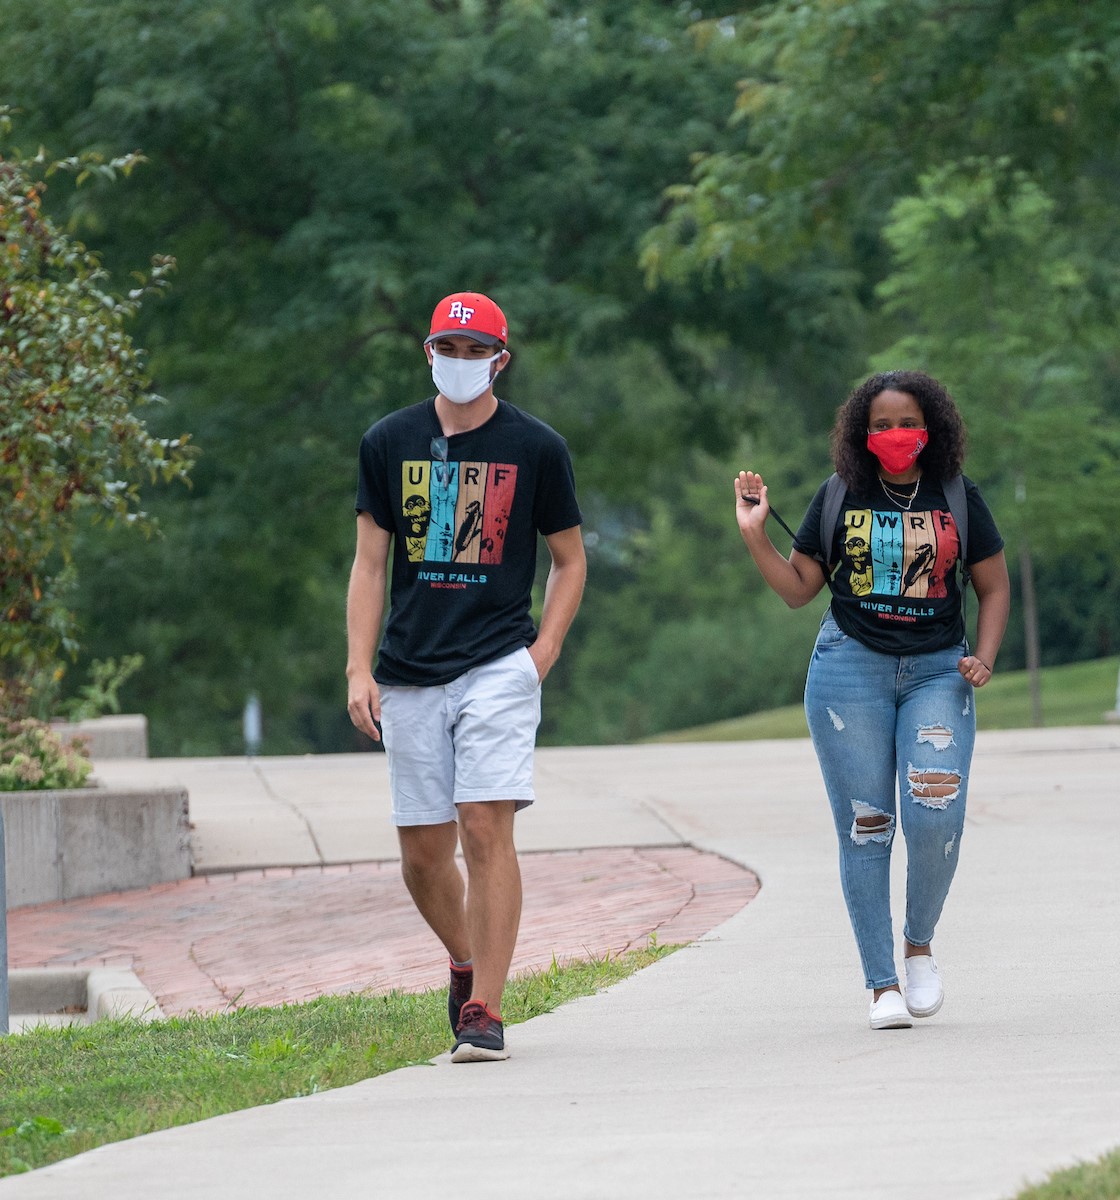 Students walking with masks on while physically distancing on campus